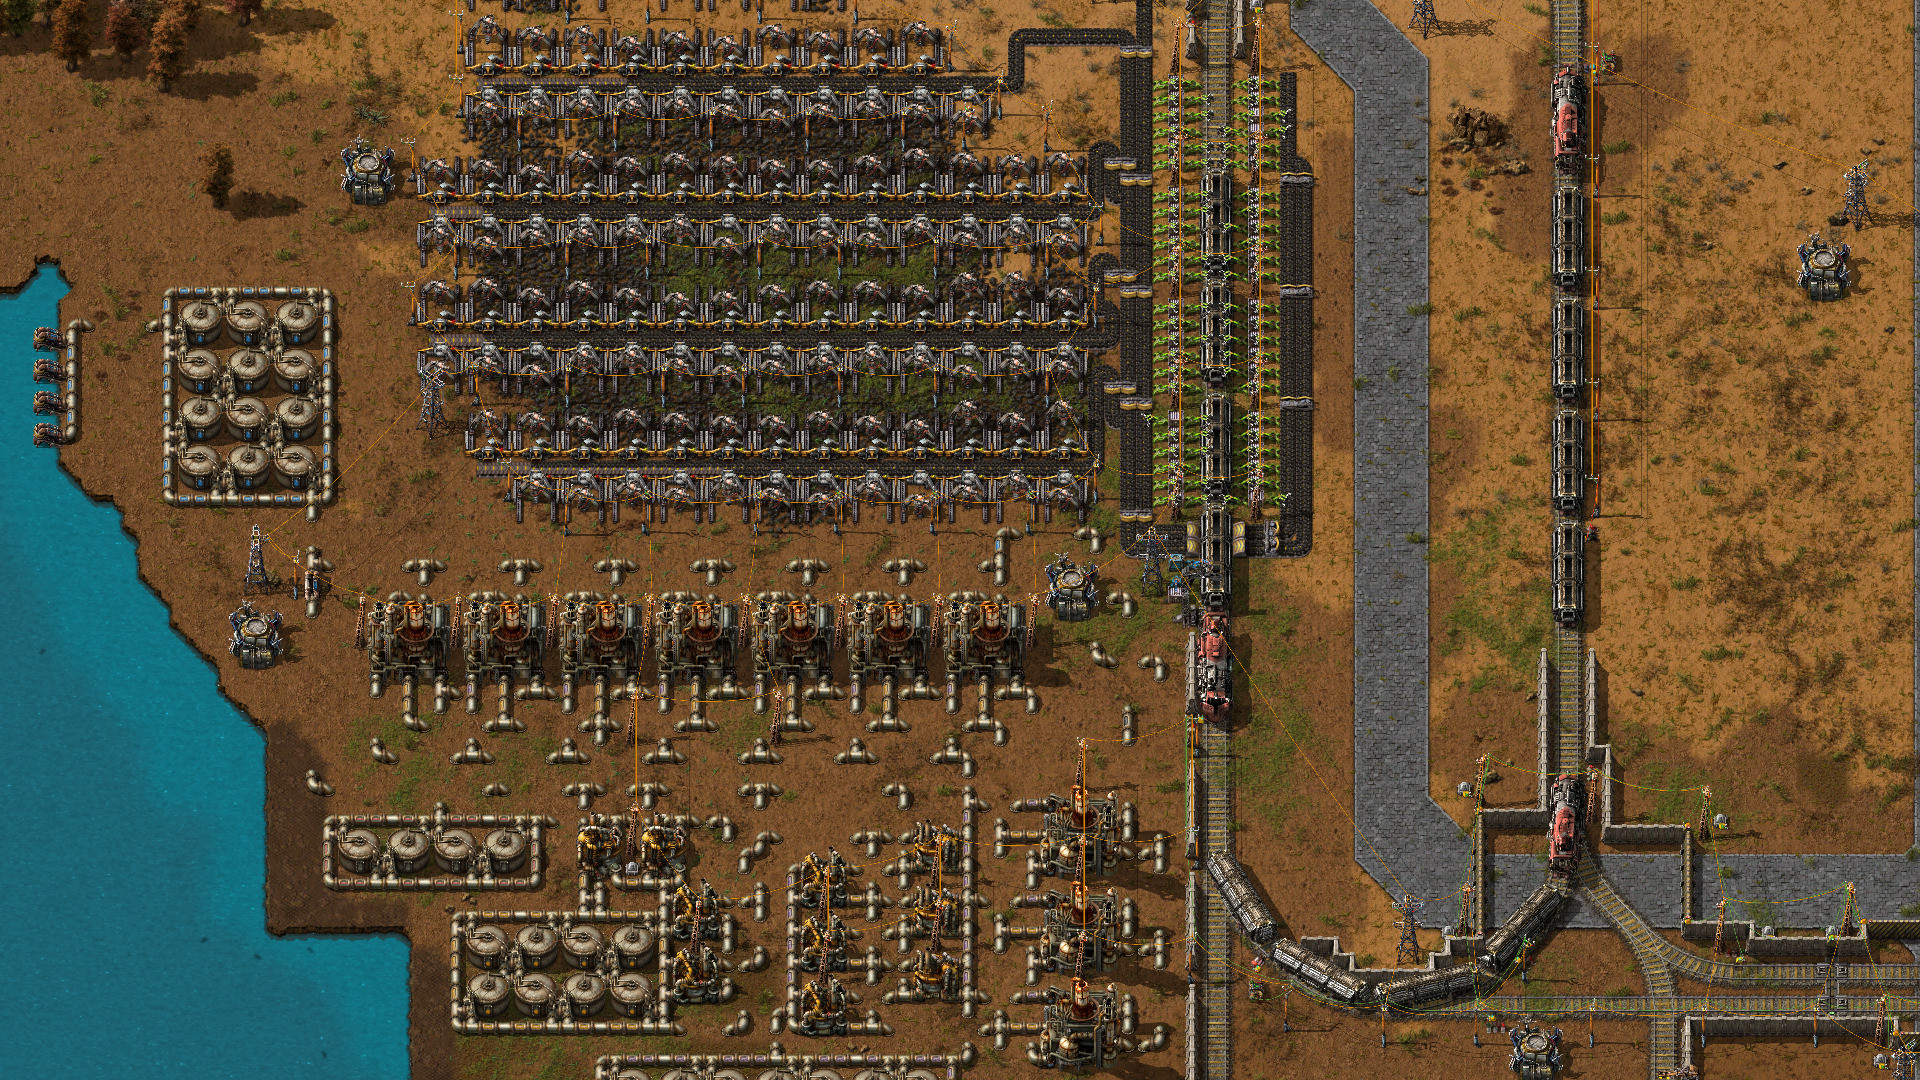 factorio download standonly with steam copy